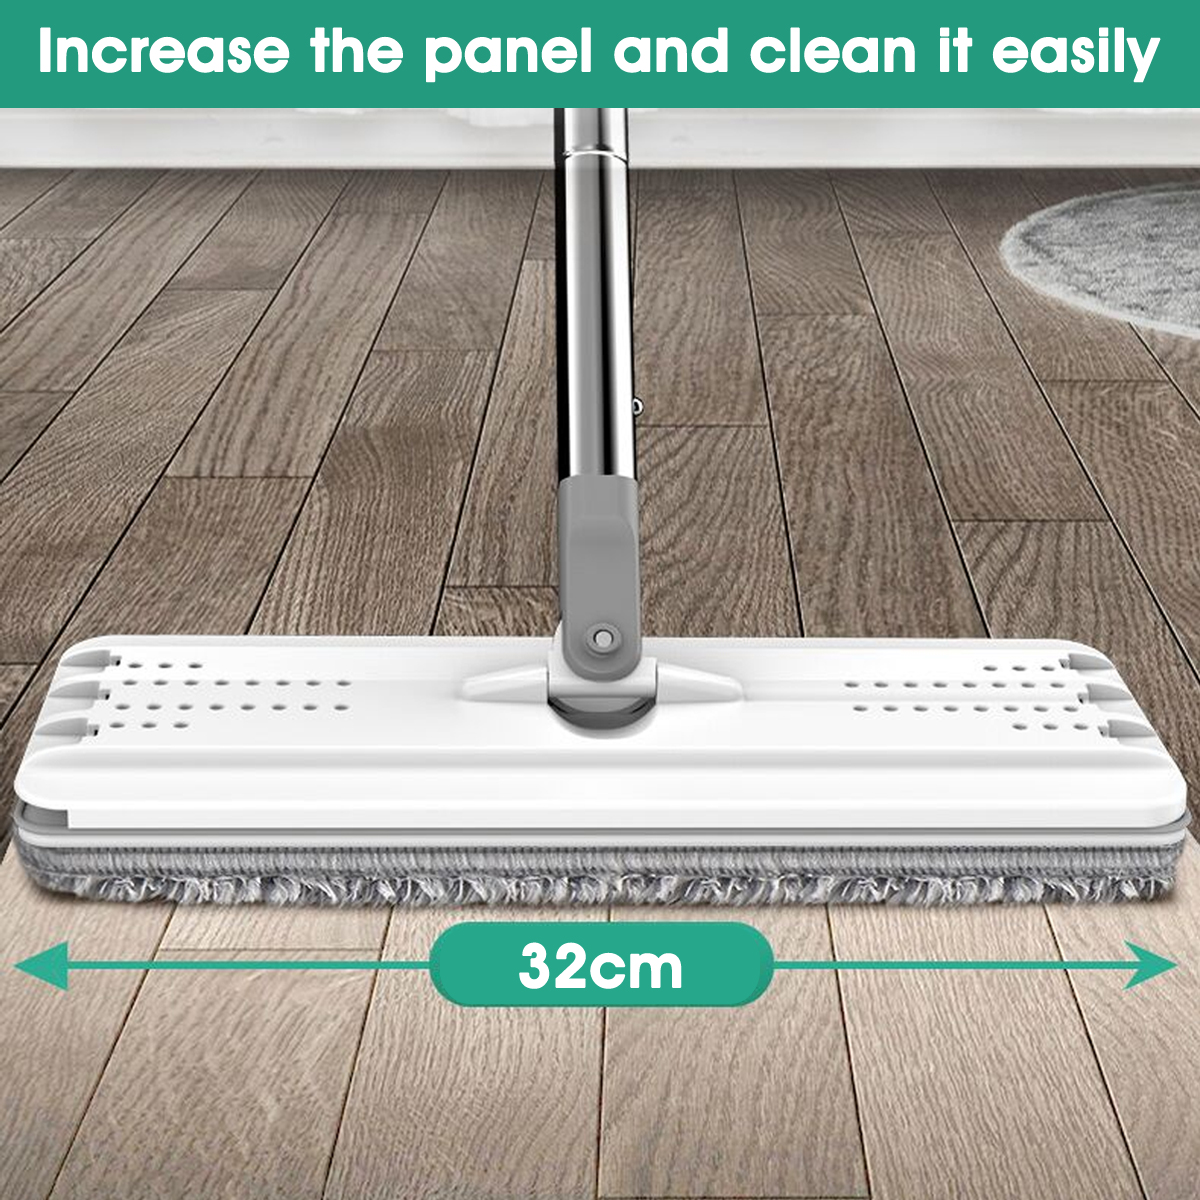 Dry-Wet-Automatic-Spin-Mop-Floor-Cleaner-Washing-Fiber-Hand-Cleaning-Dust-Fast-1588119-3